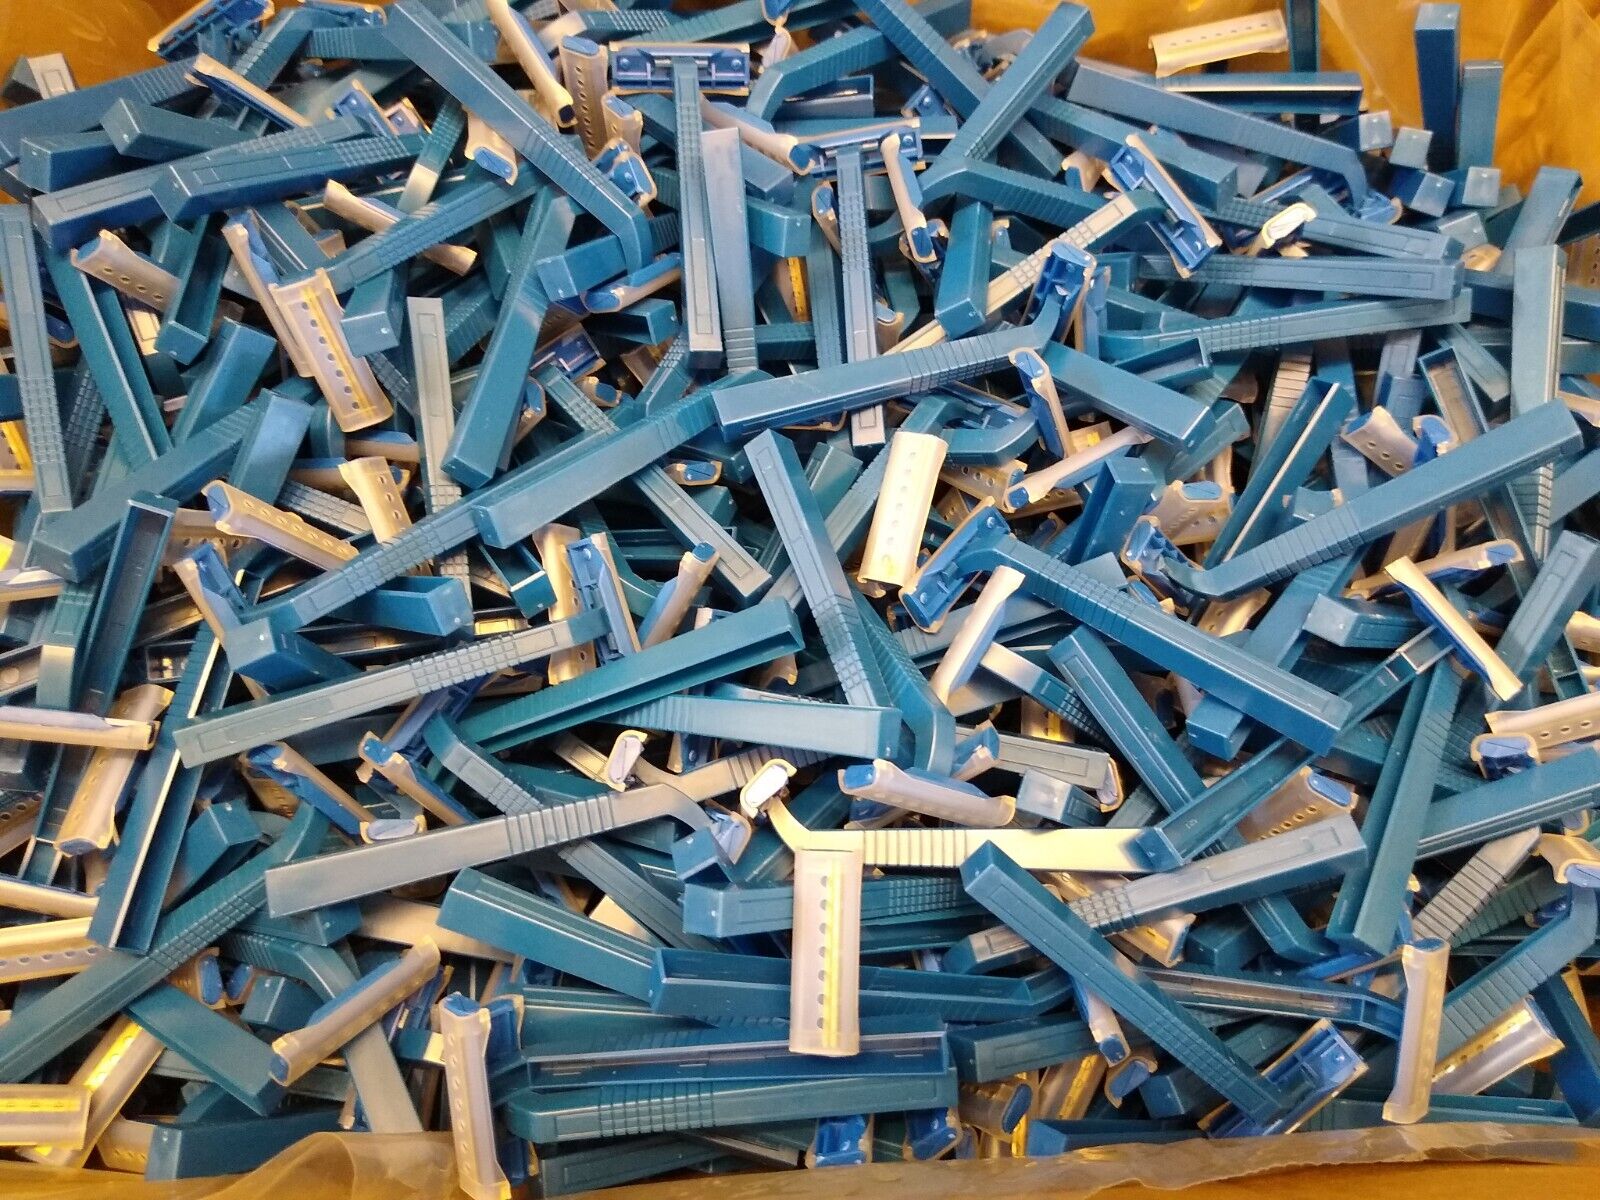 LOT OF 100 Twin Blade Blue Disposable Razors  Unbranded RAZR-6BX